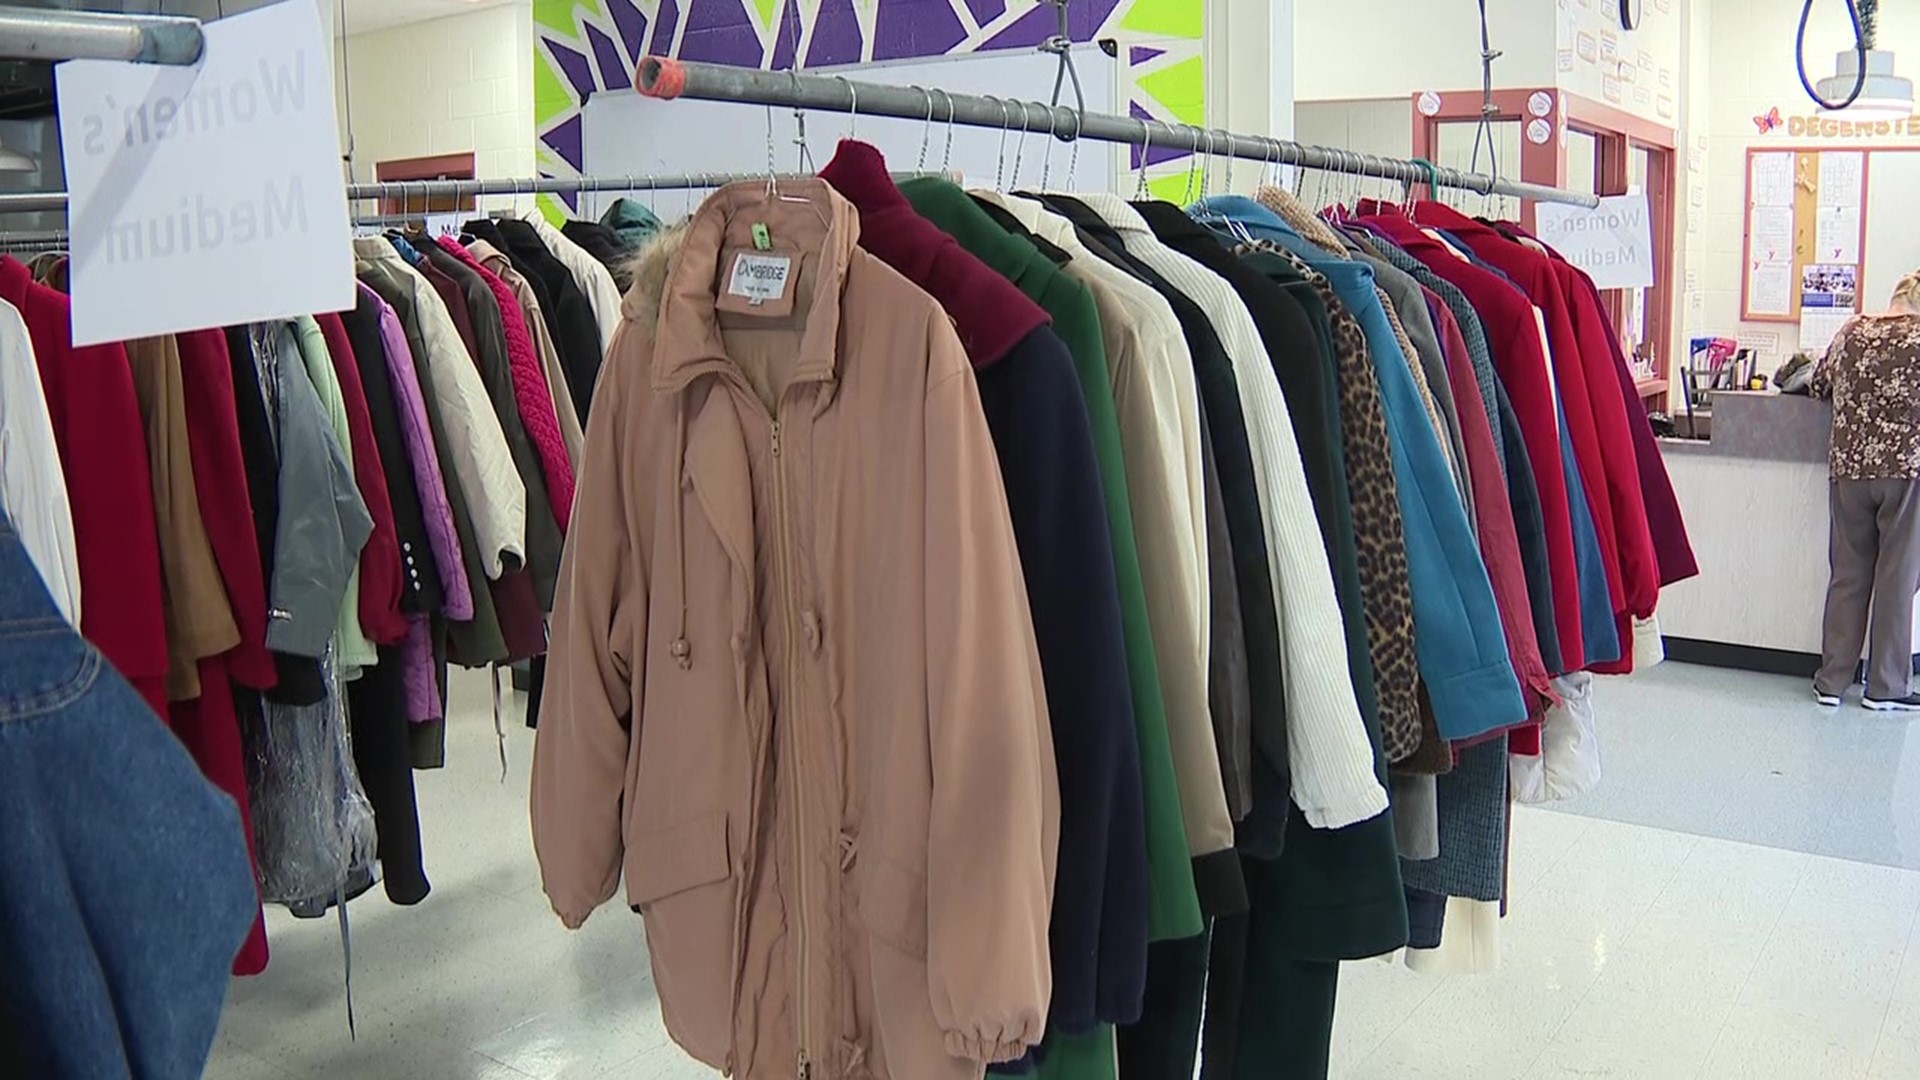 More than 1,000 coats have been donated to the annual coat drive in Sunbury.